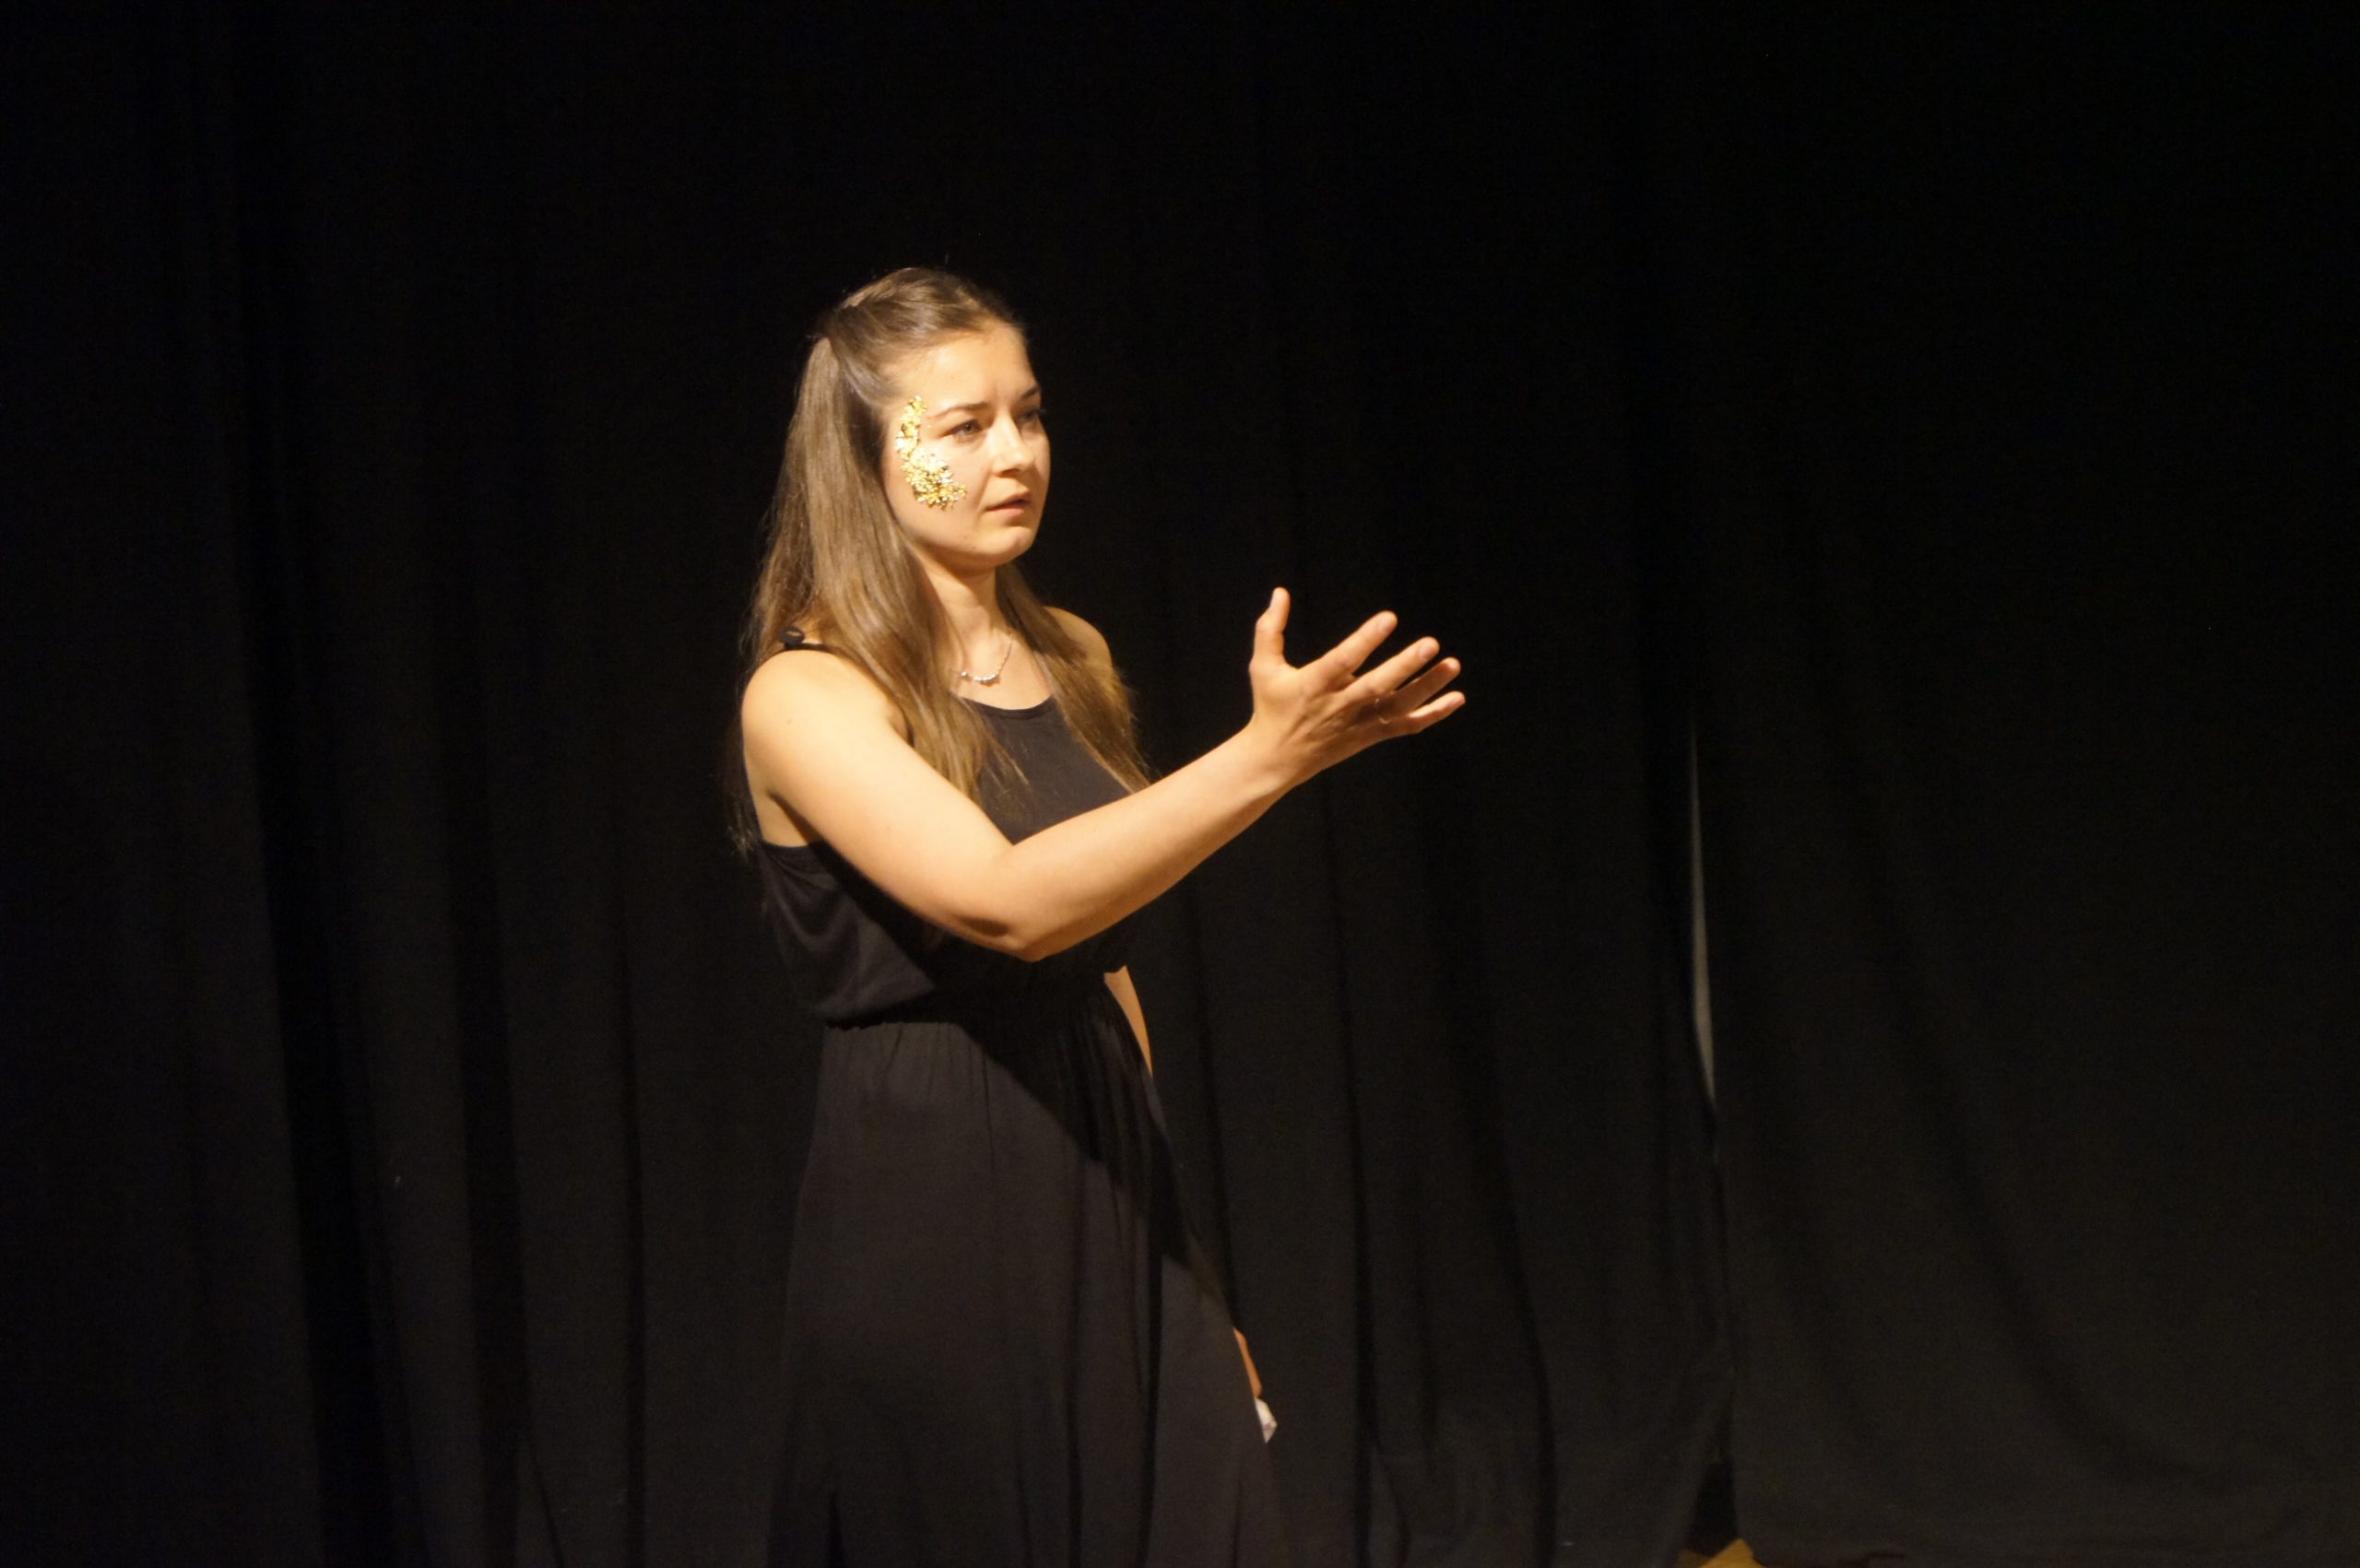 Photo from the theatre performance Keeping up with the Greeks. woman on stage with a black dress, dark blonde hair, golden flakes on her right cheek. Black curtain behind her. She is reciting